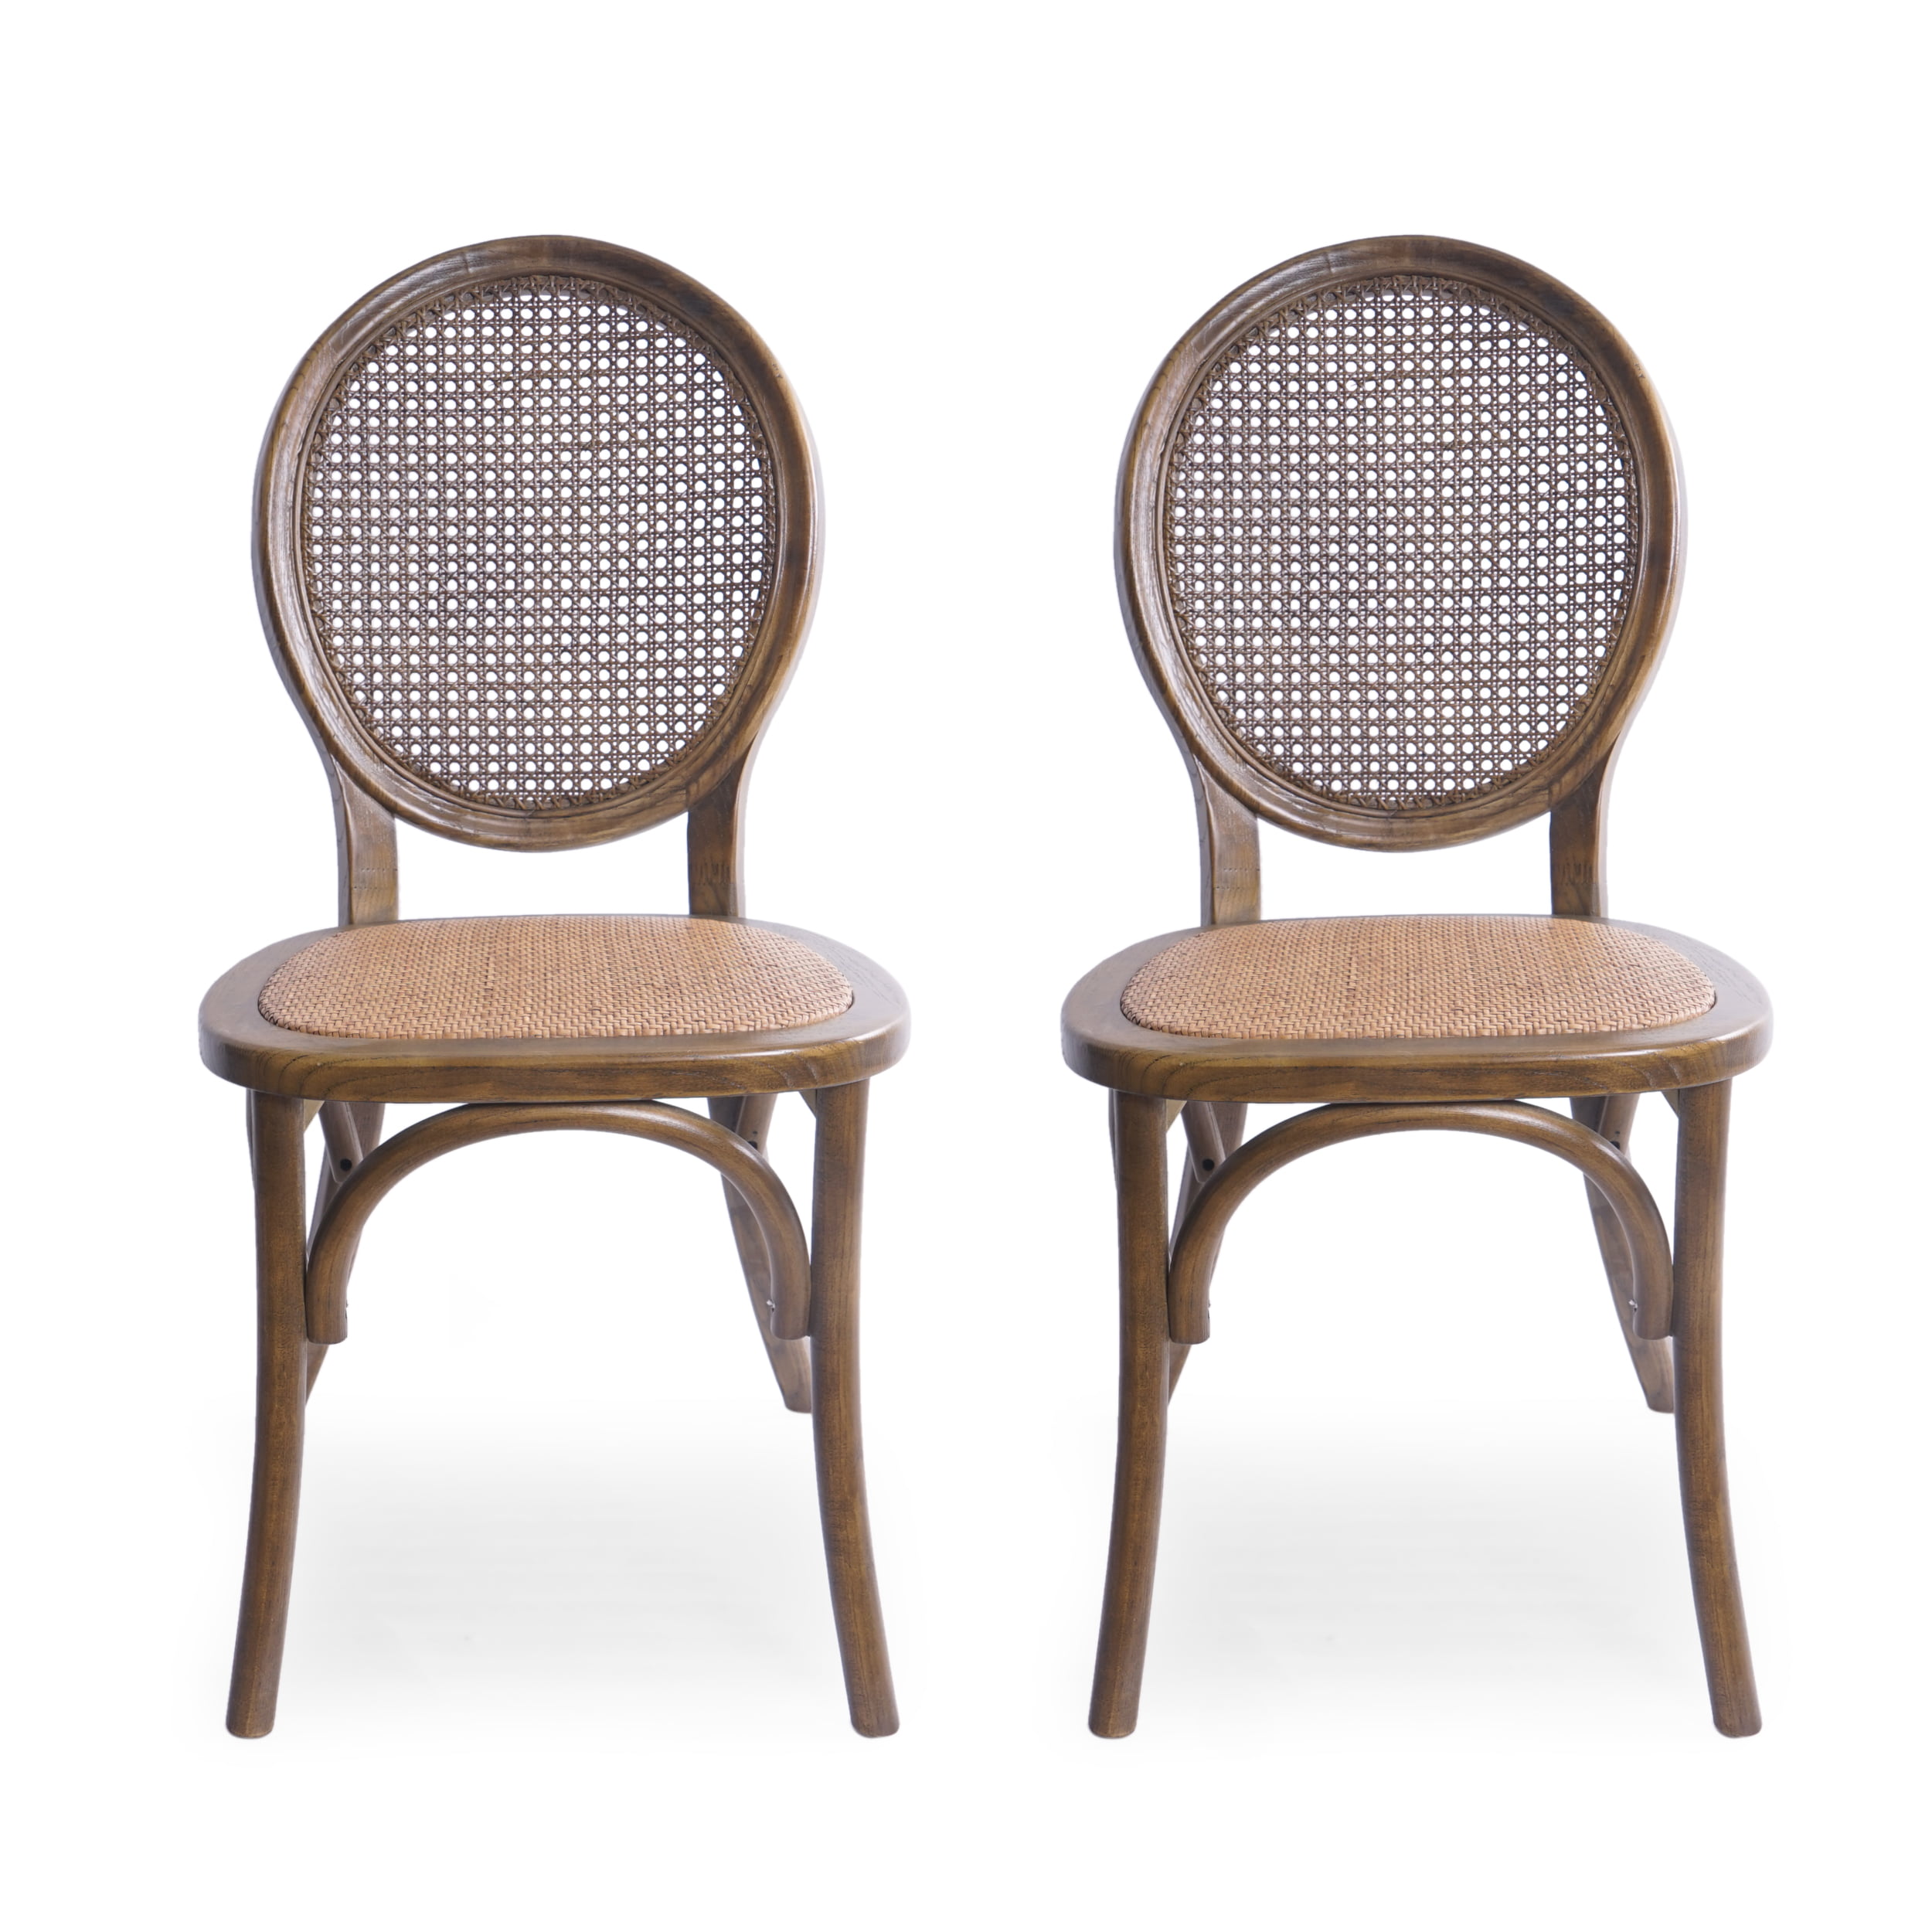 Denni Elm Wood and Rattan Dining Chair with Rattan Seat (Set of 2